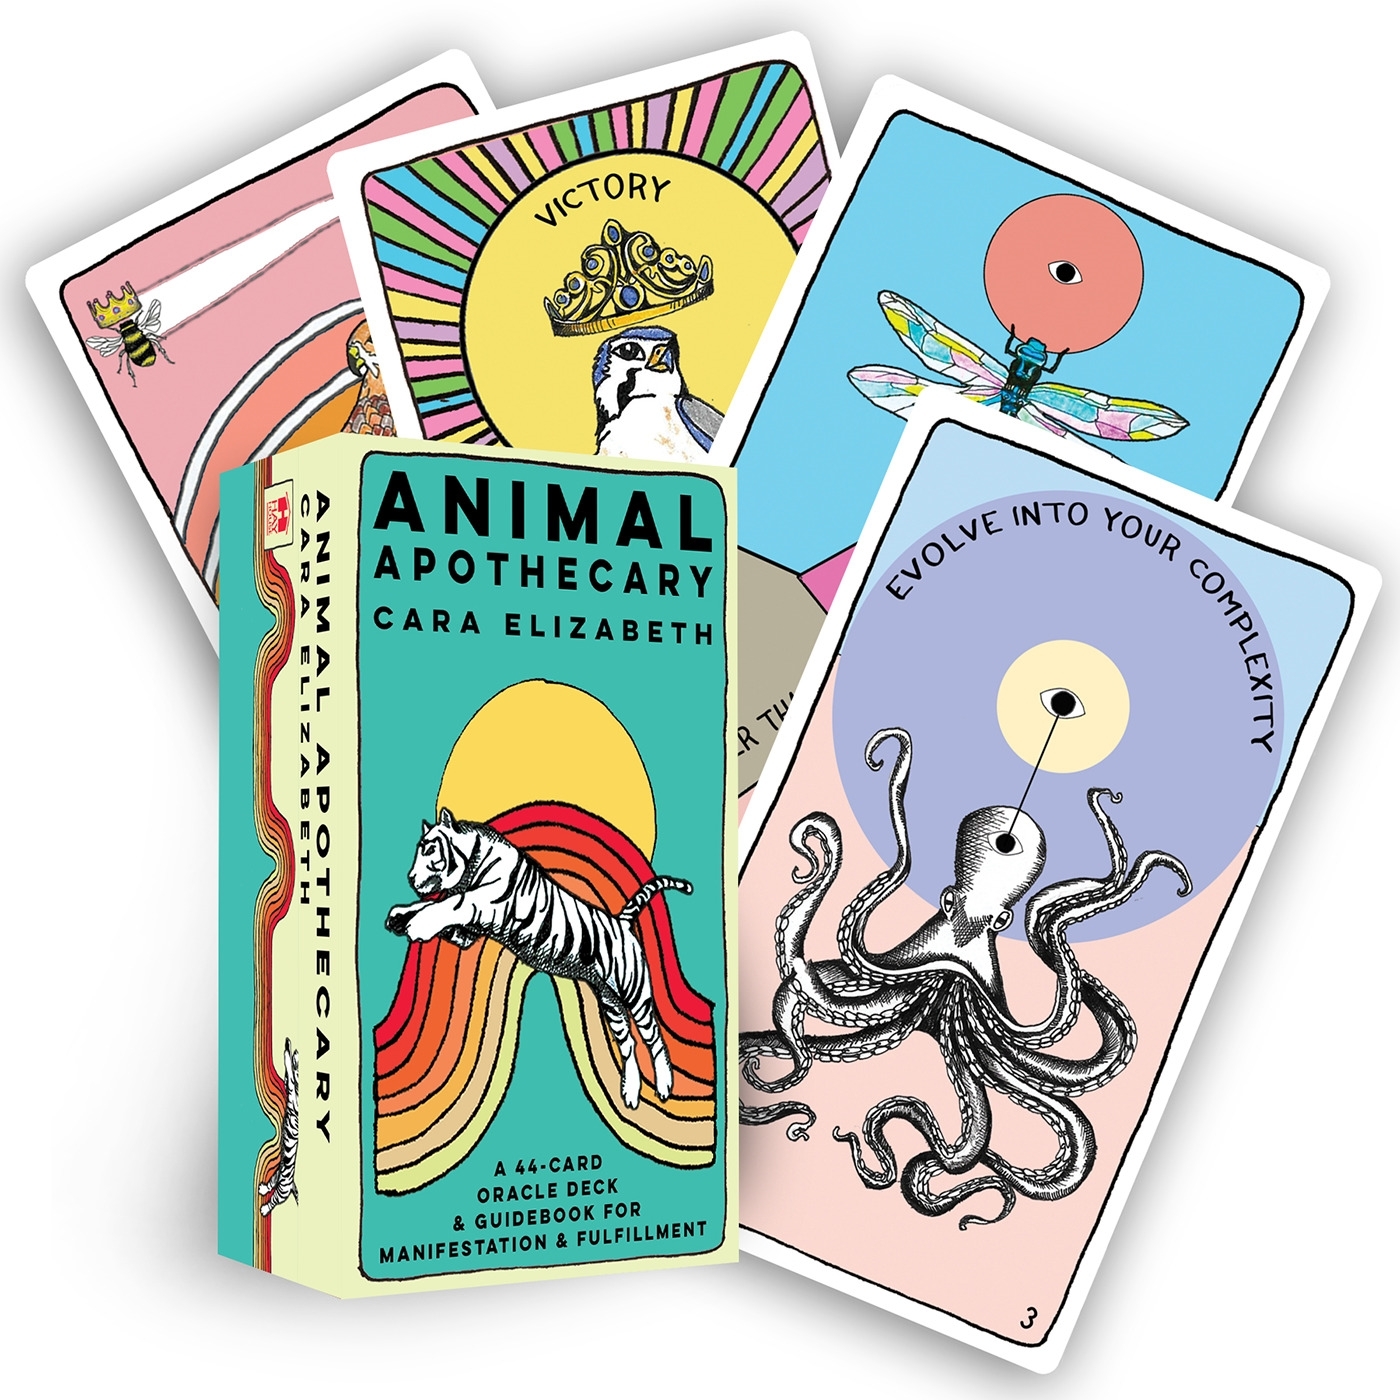 Animal Apothecary: A 44-Card Oracle Deck & Guidebook